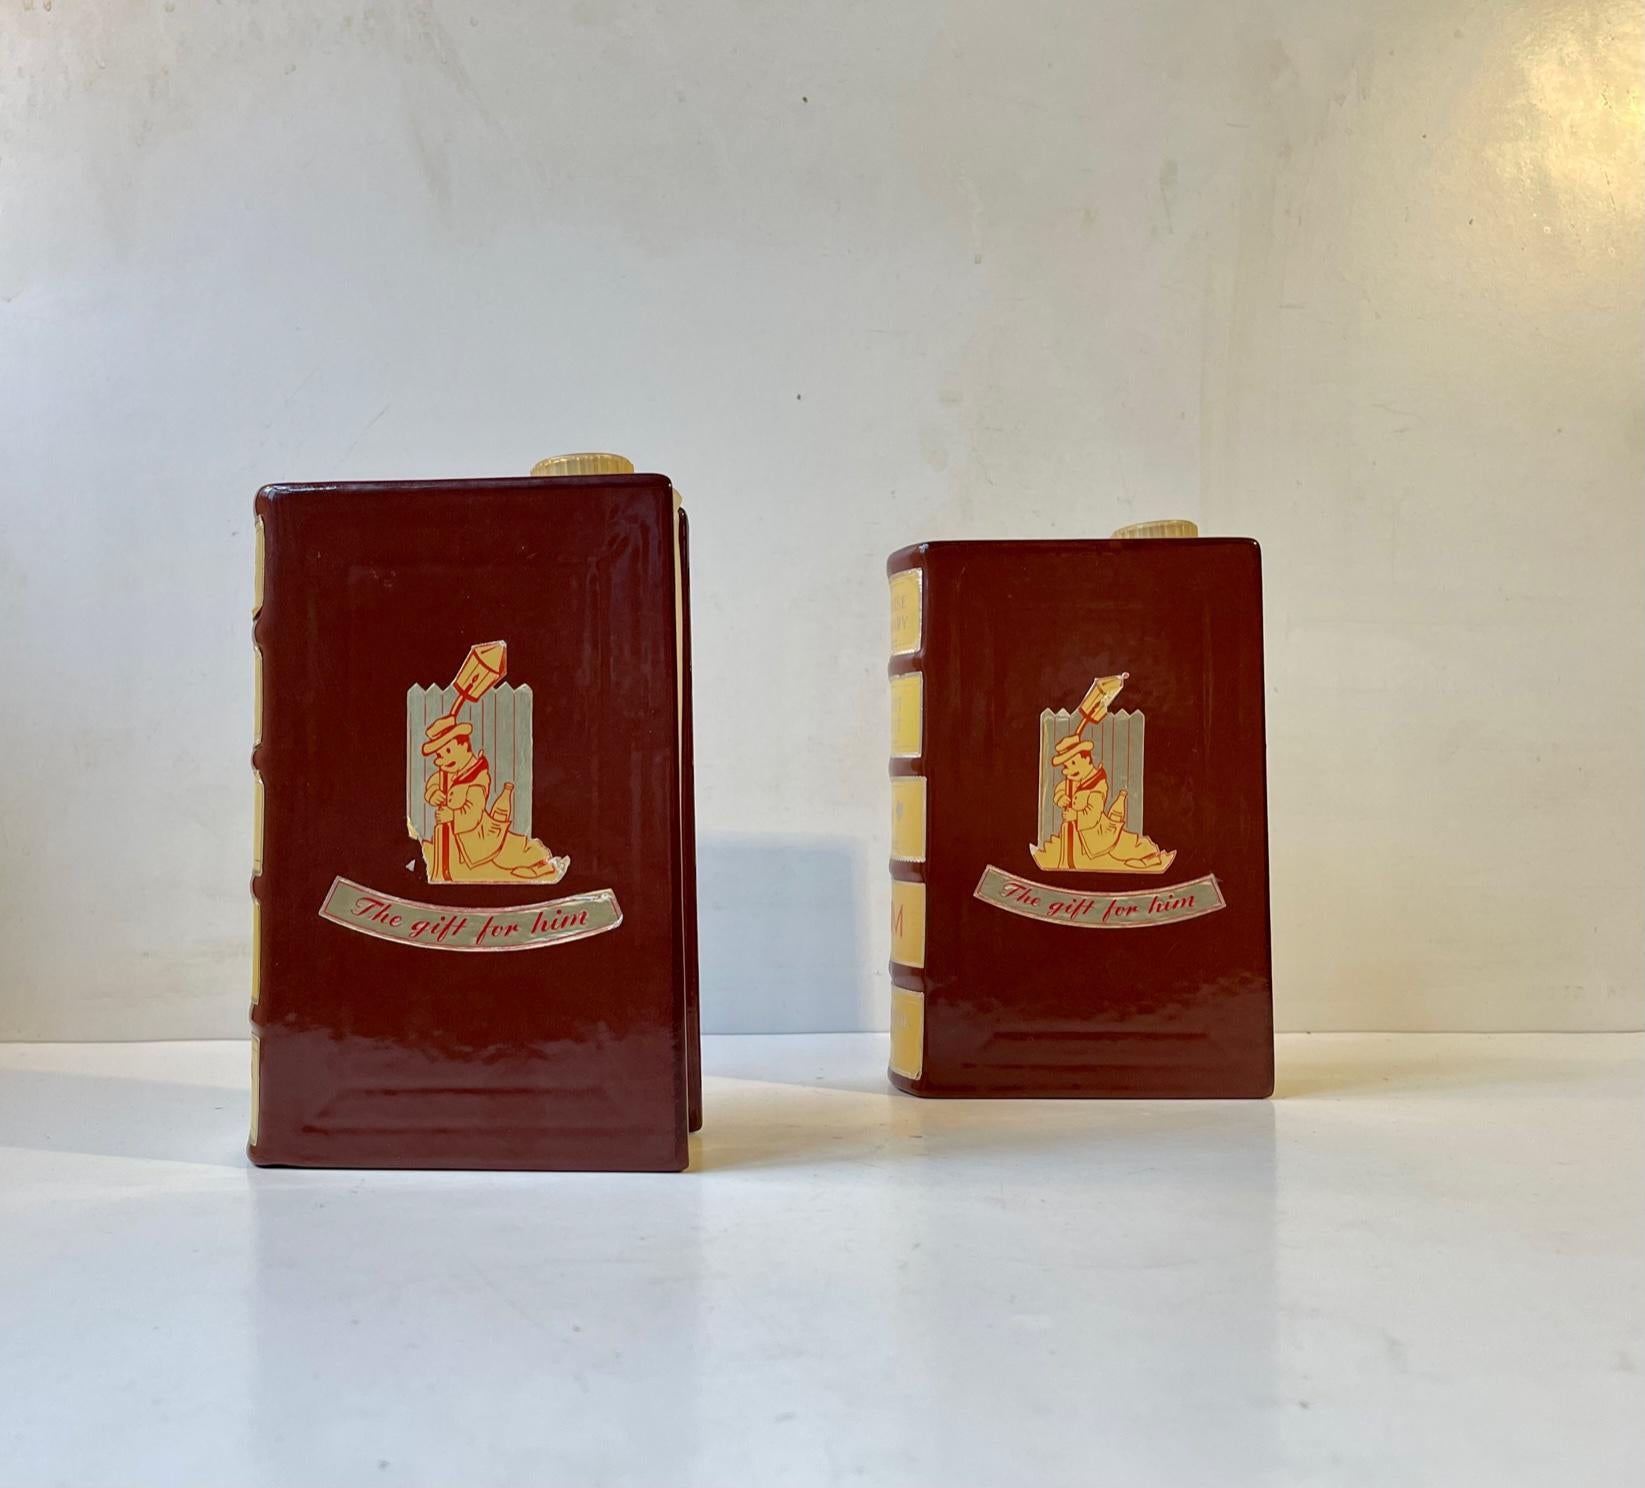 Glazed Vintage German Decanters Disguised as Books: Gin & Rum